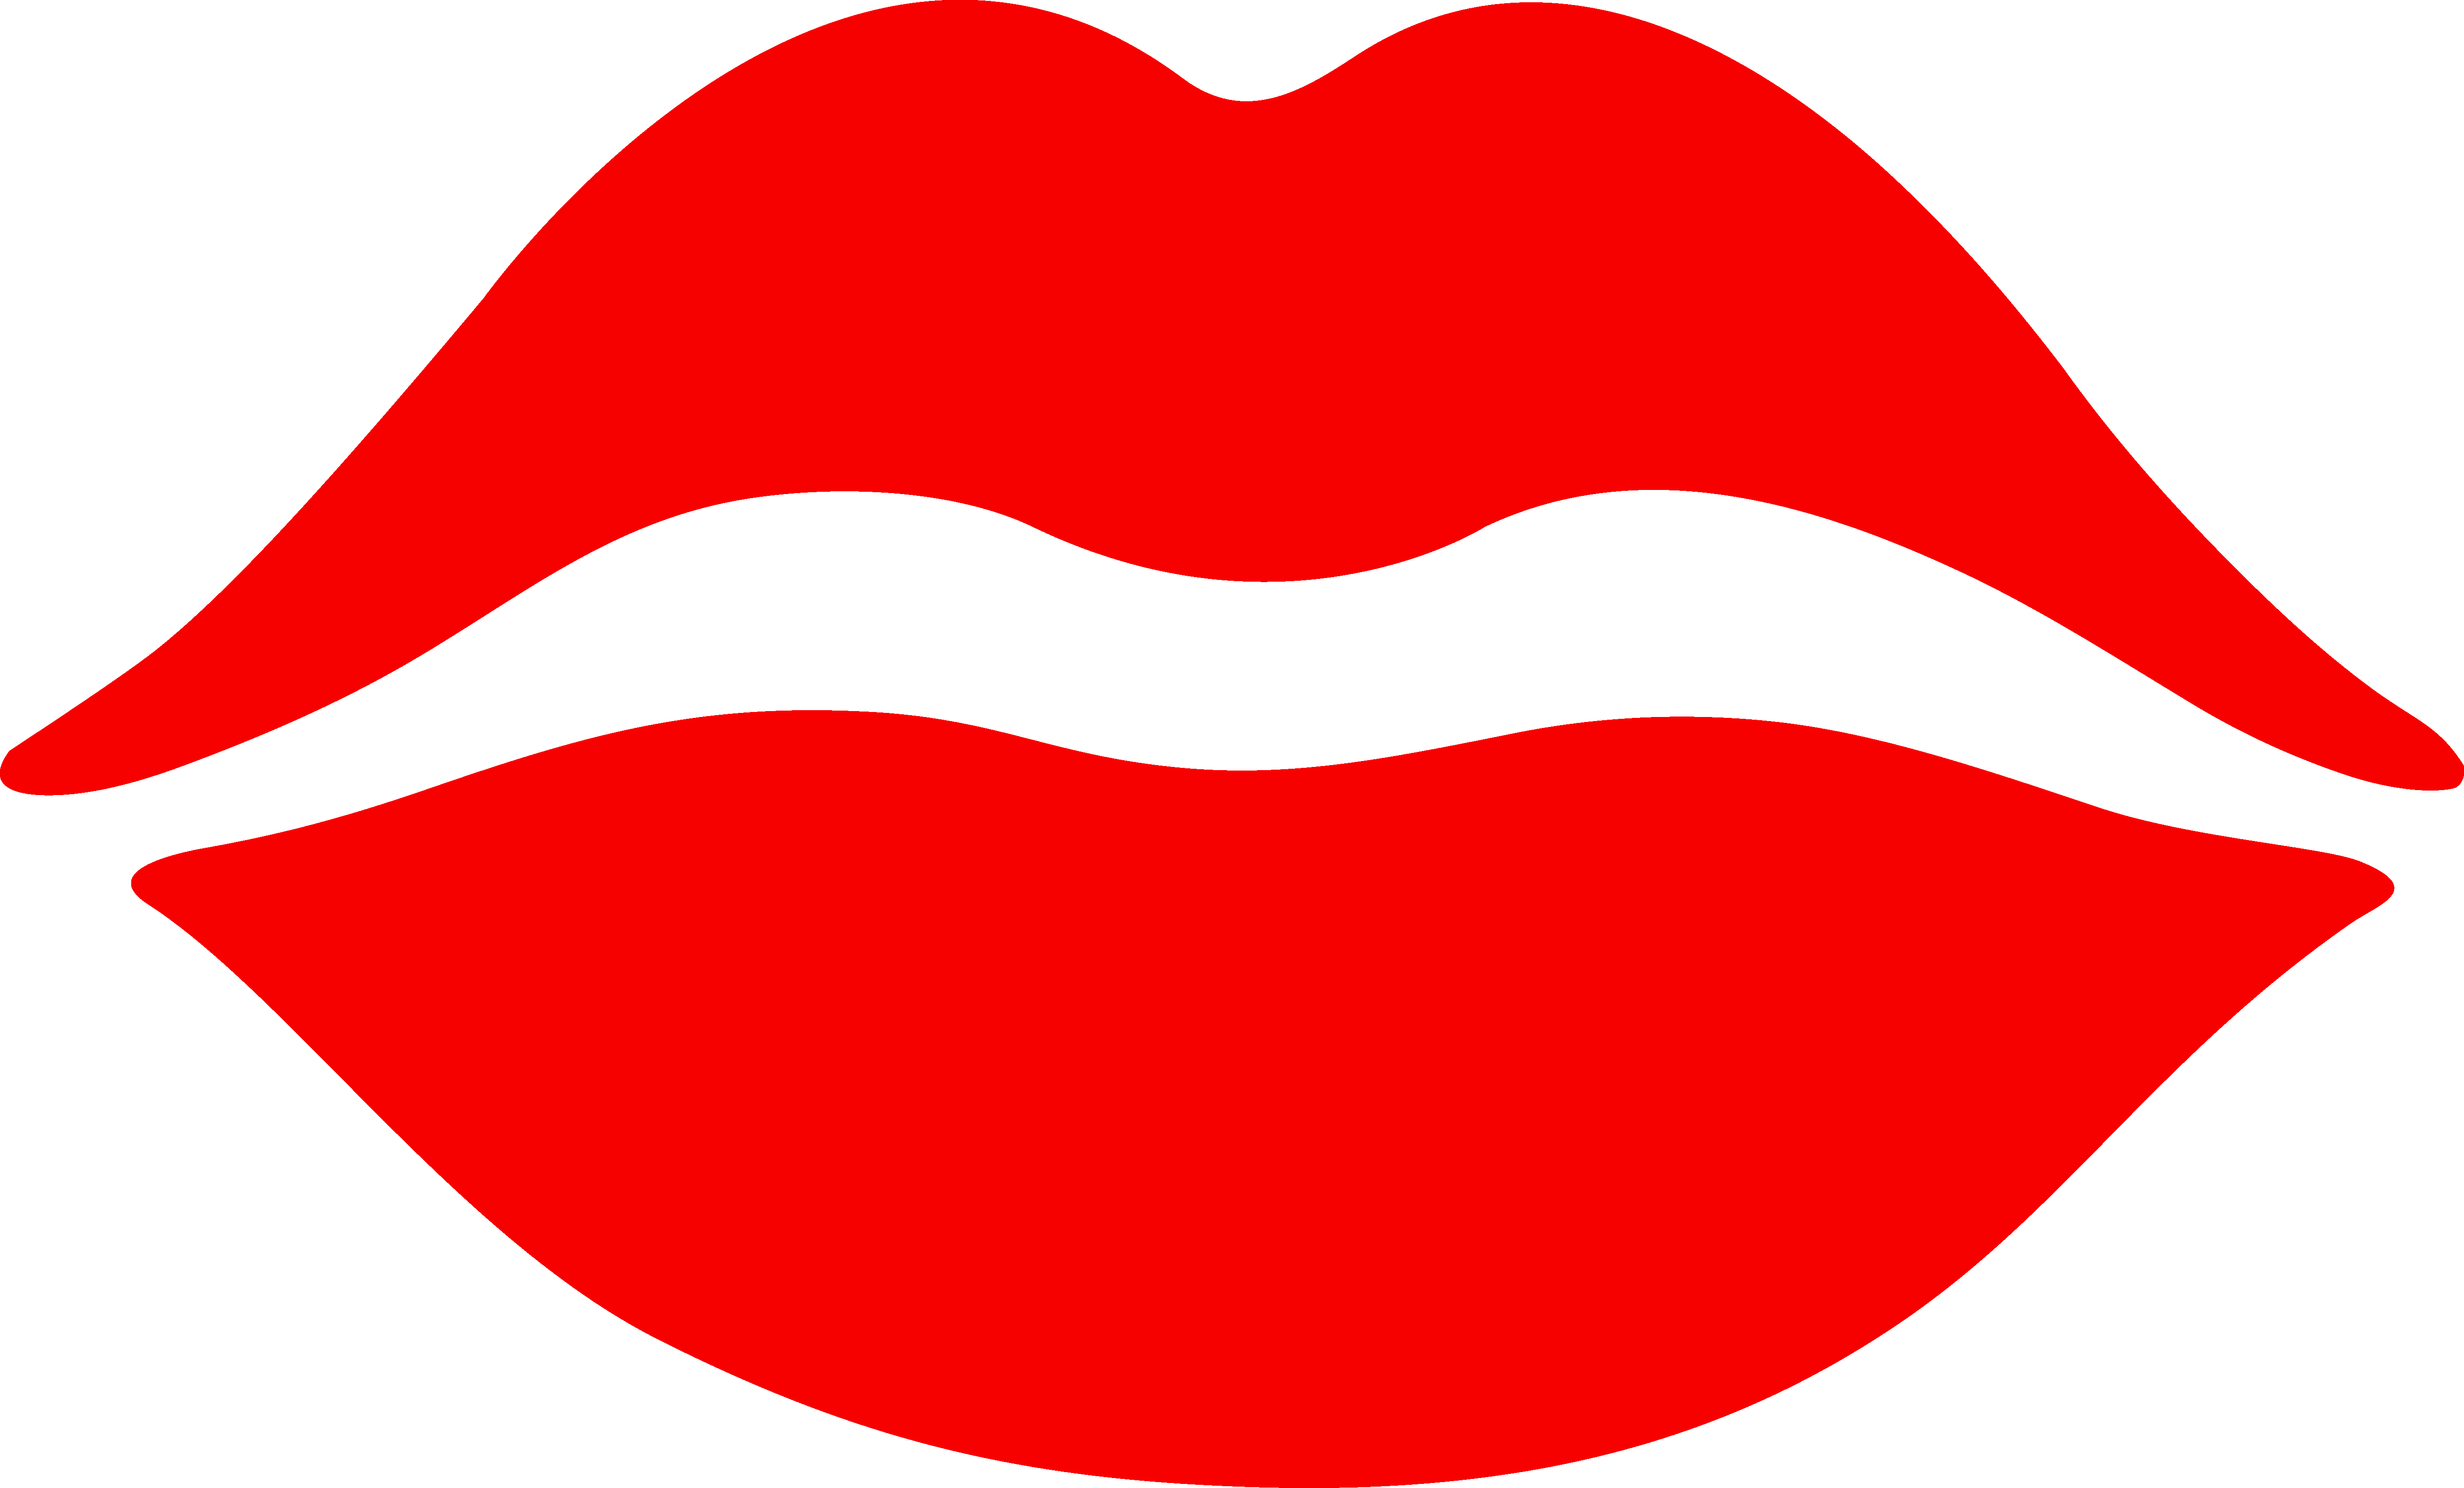 Cartoon Lips Red PNG HD Quality